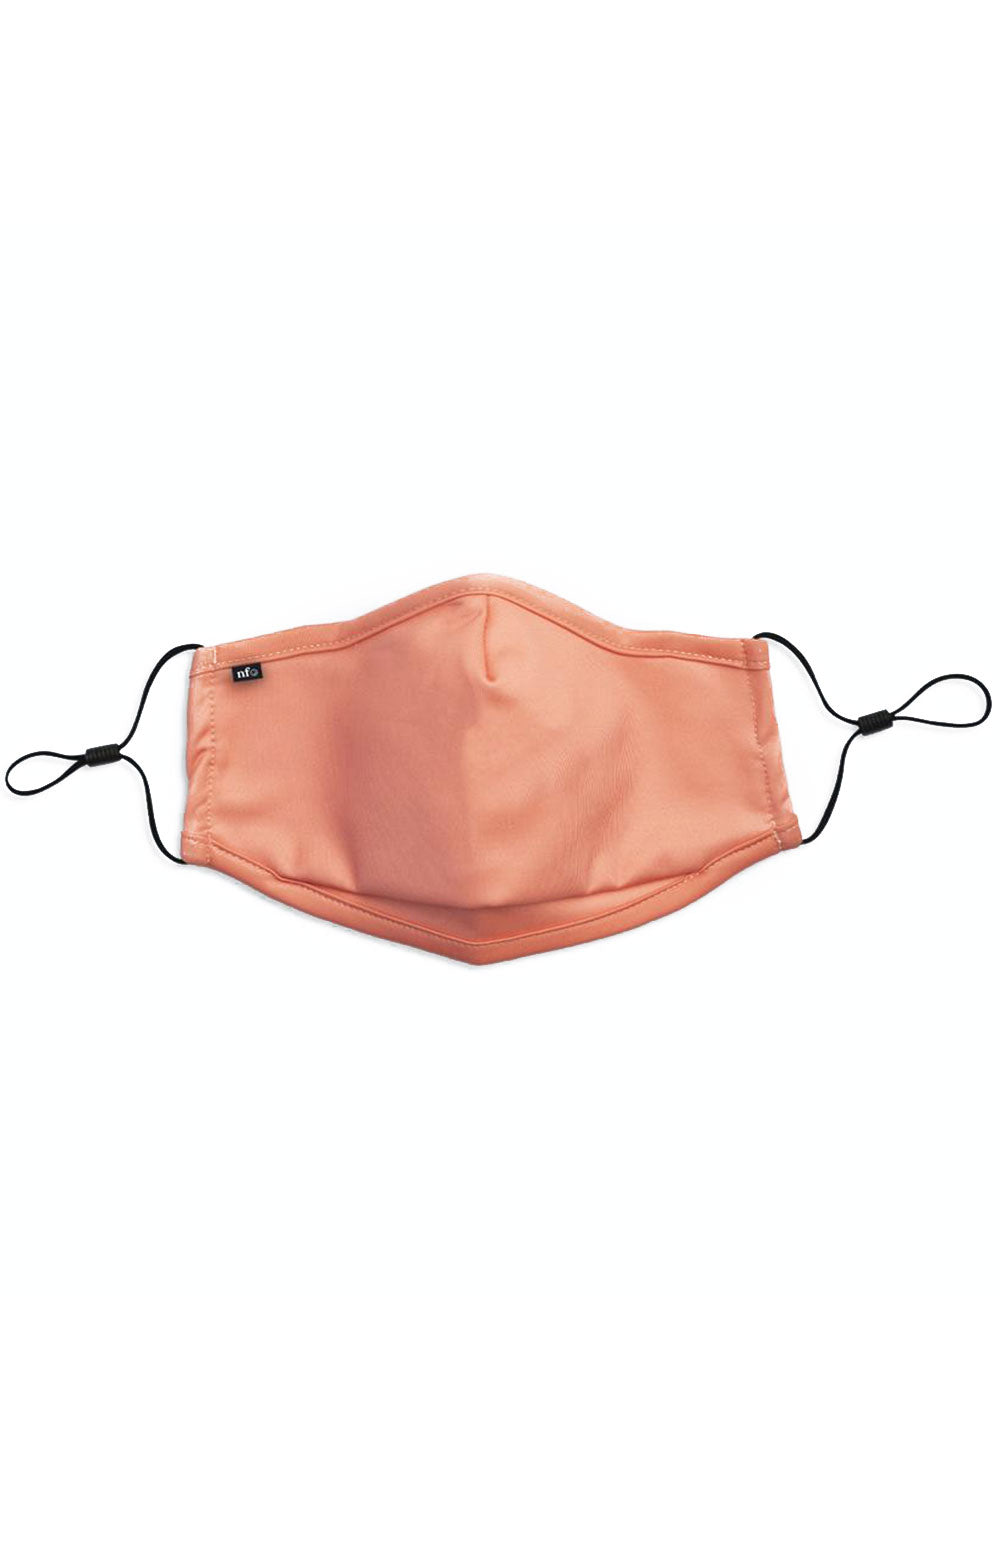 Adult Anti Bacterial Knit Face Mask - Orange